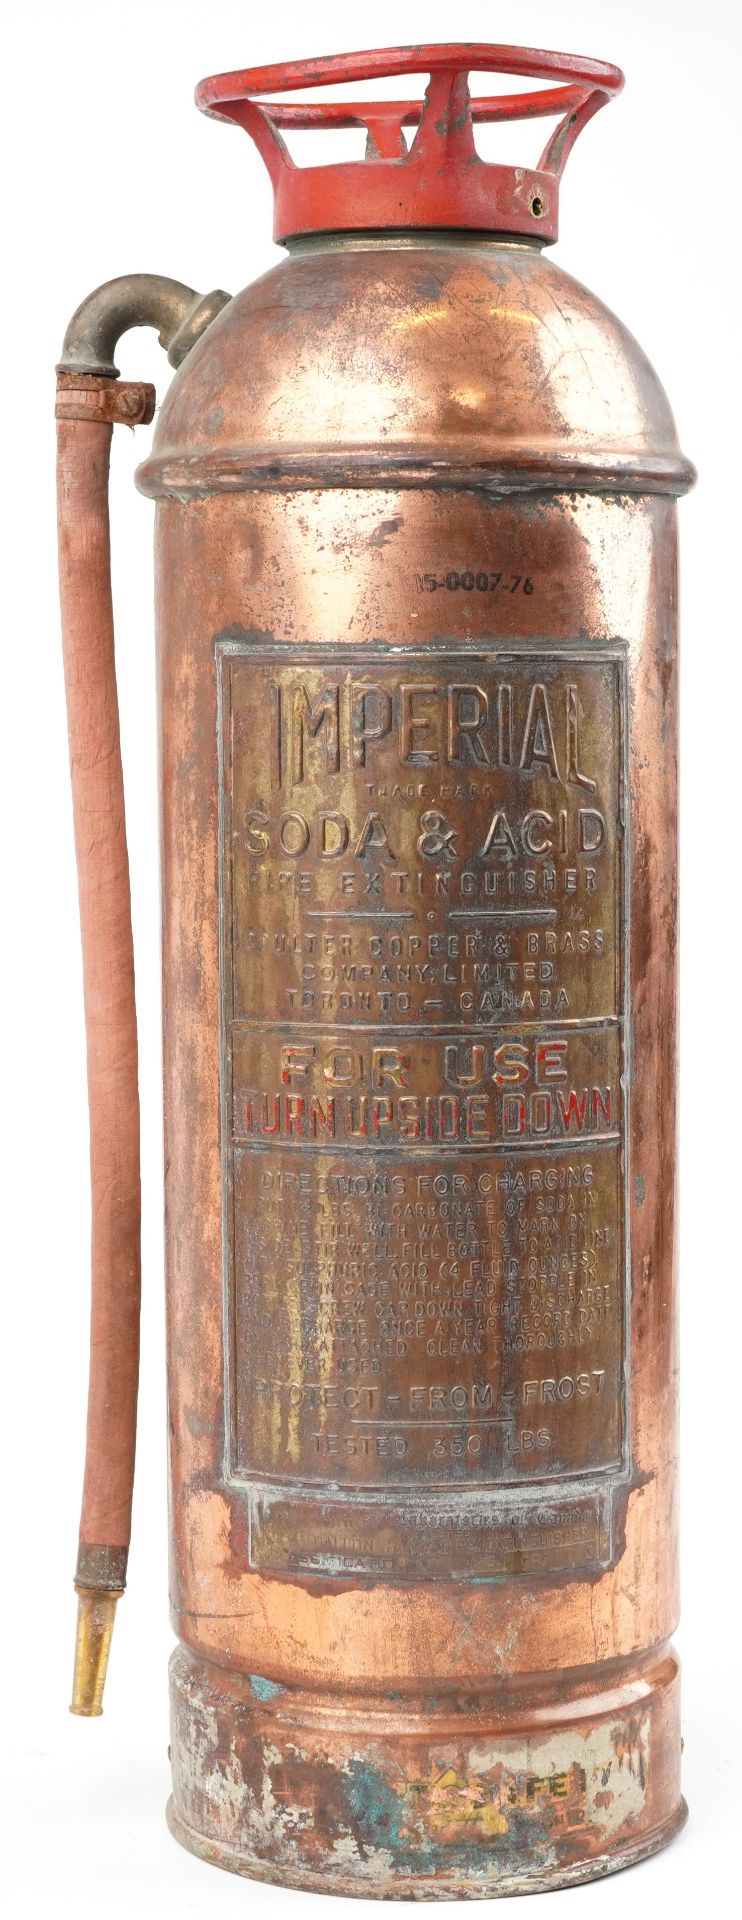 Vintage Canadian Imperial soda and acid copper fire extinguisher with brass plaques, 60.5cm high - Image 2 of 5